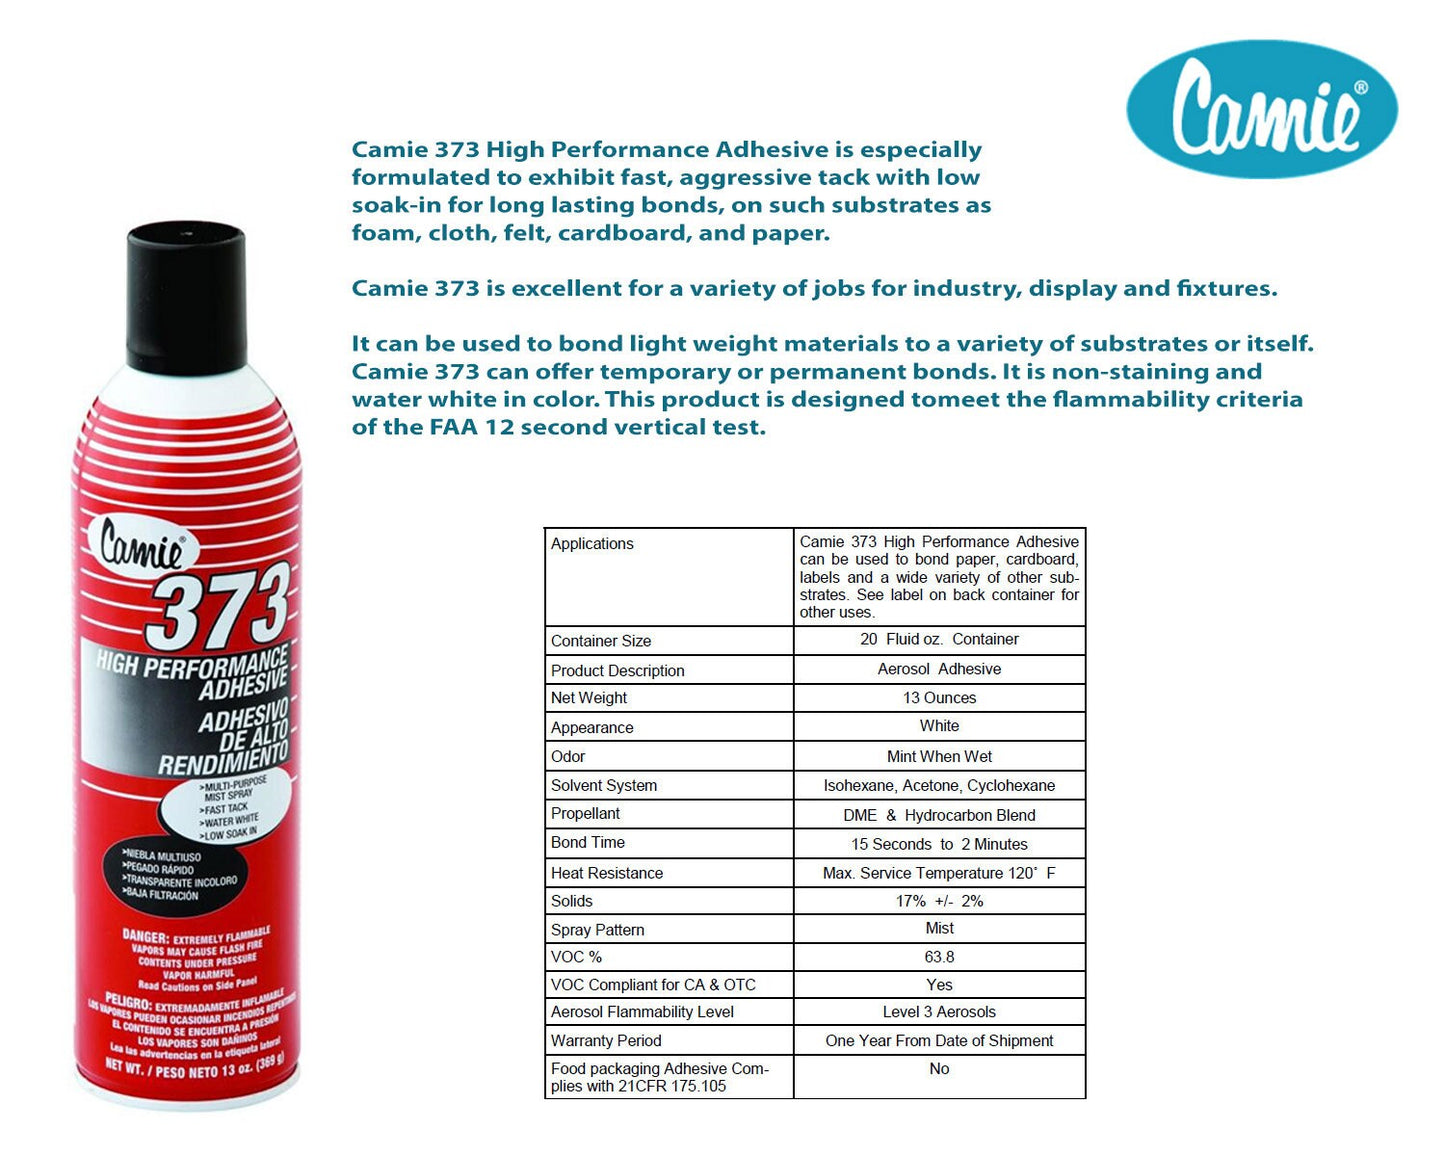 Camie 373 High Performance Adhesive - 13oz - Made in USA